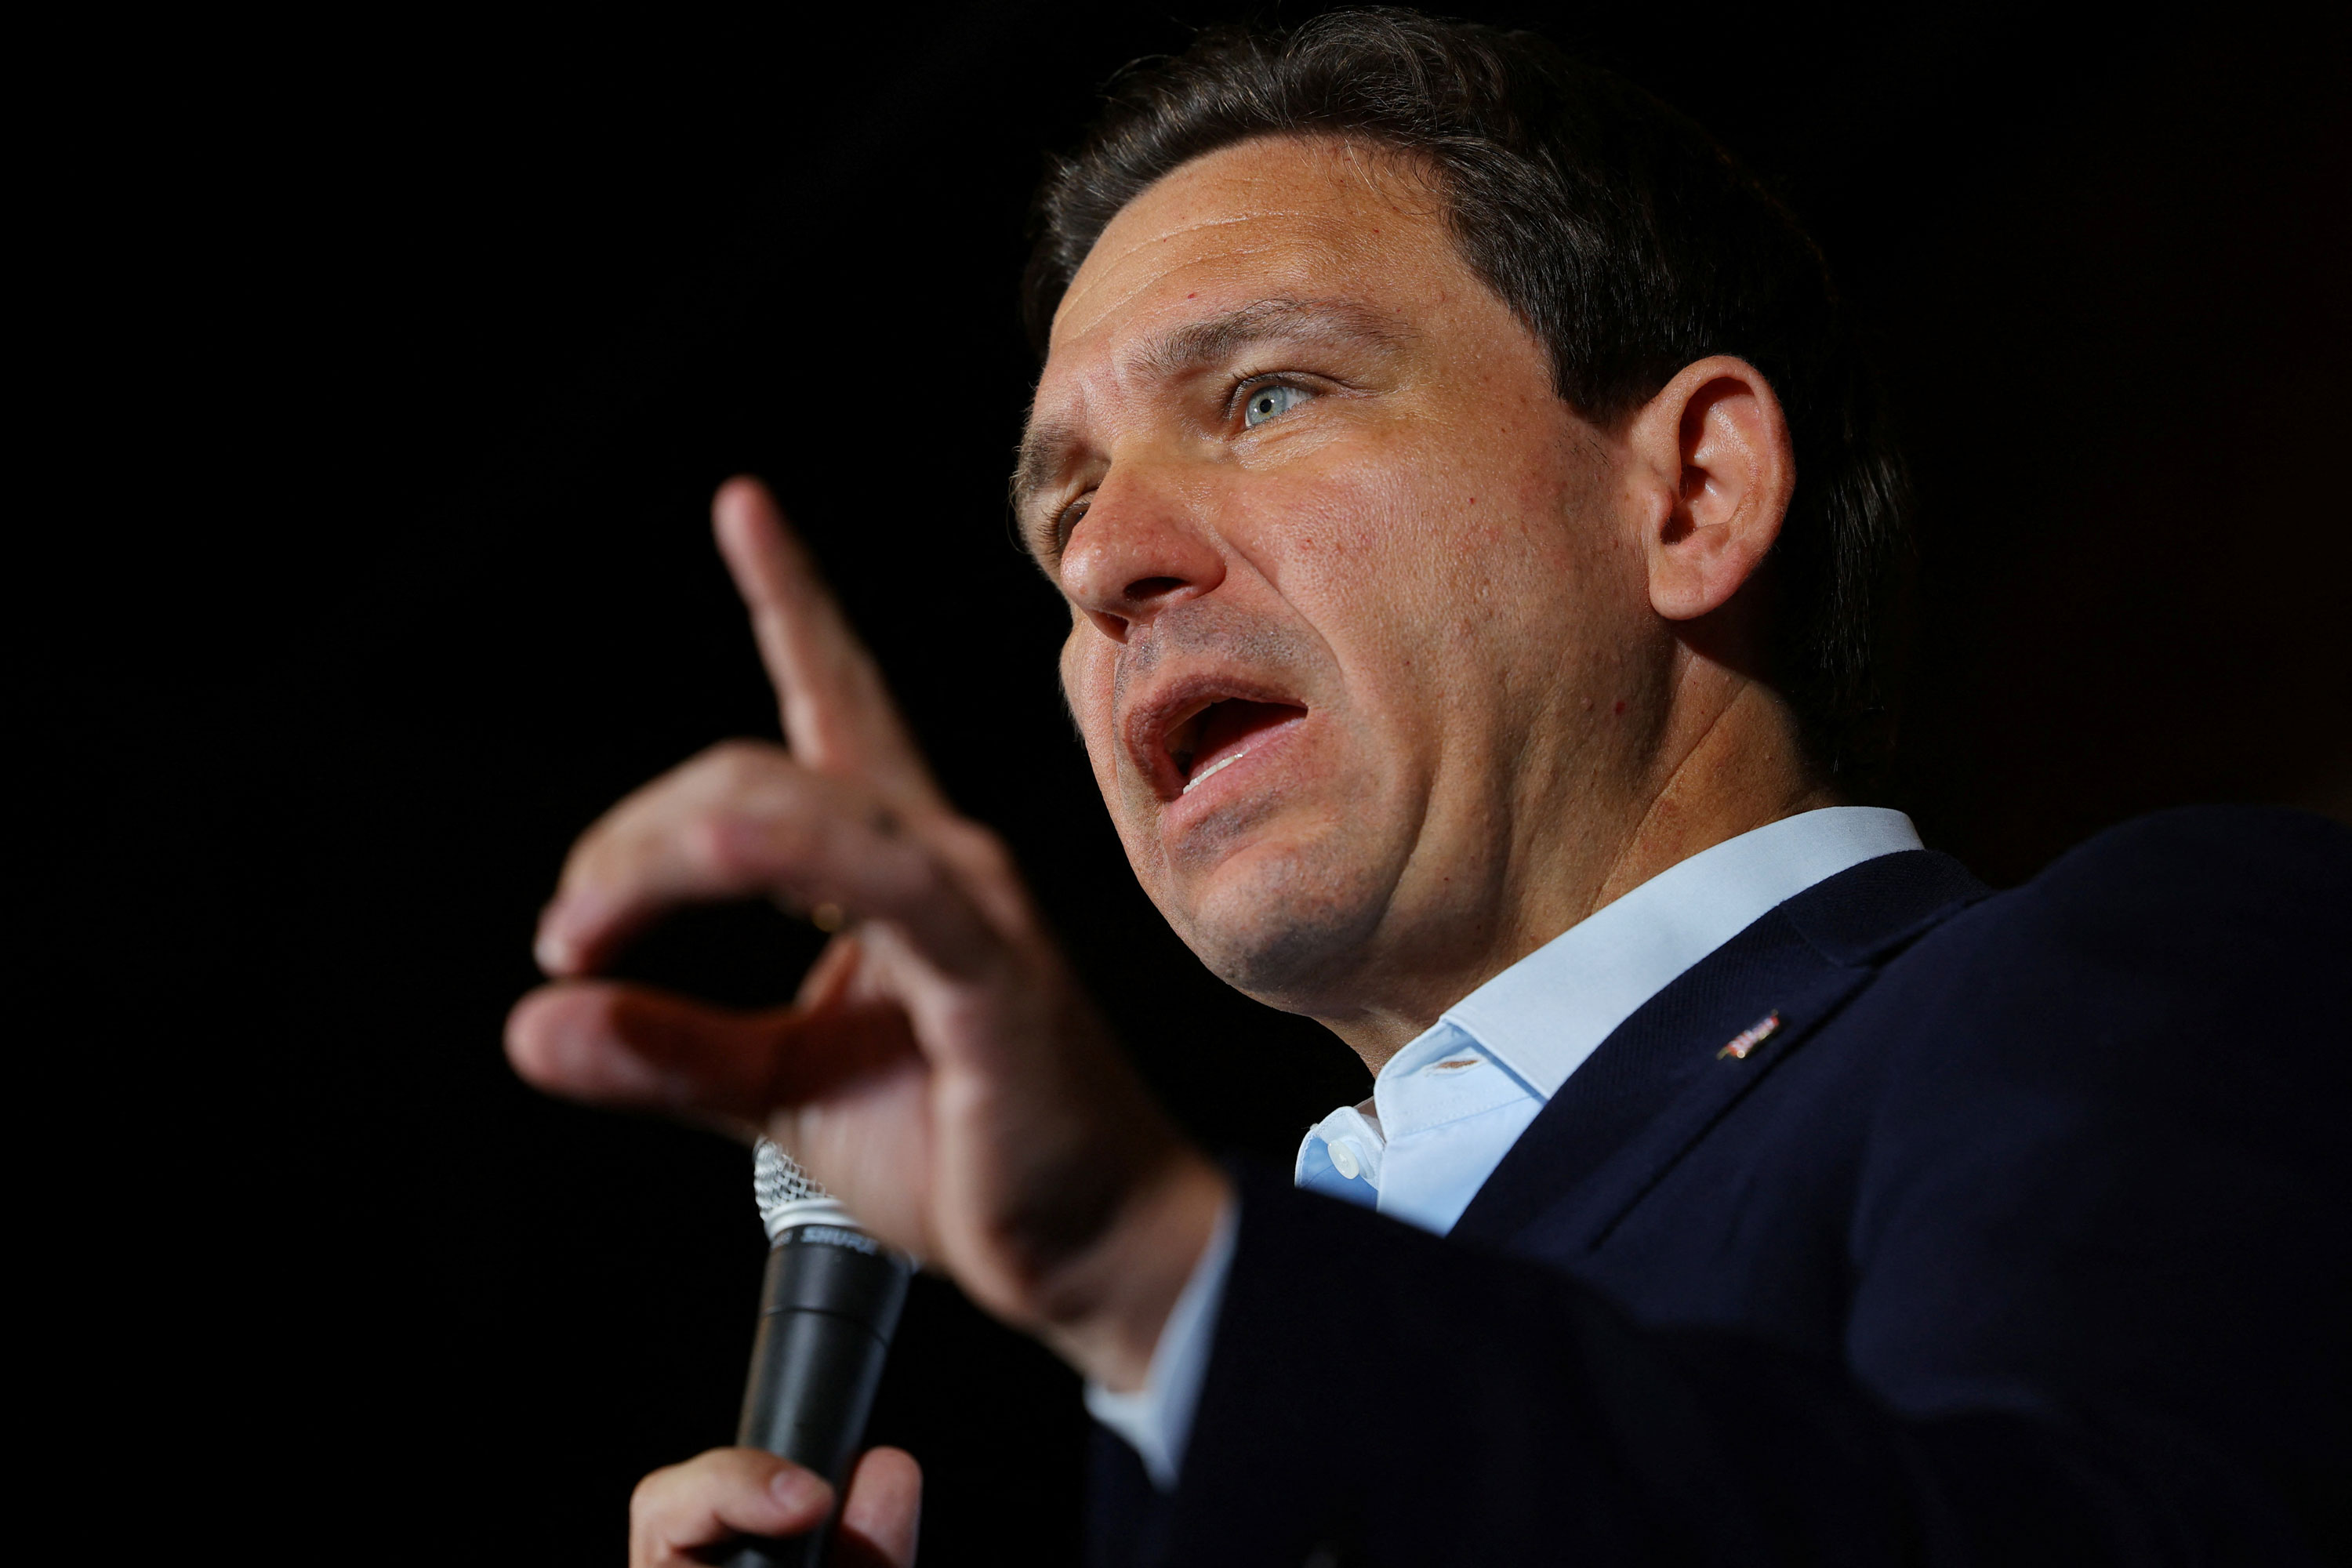 Republican presidential candidate and Florida Governor Ron DeSantis speaks during a campaign stop in Manchester, New Hampshire, on August 19, 2023.